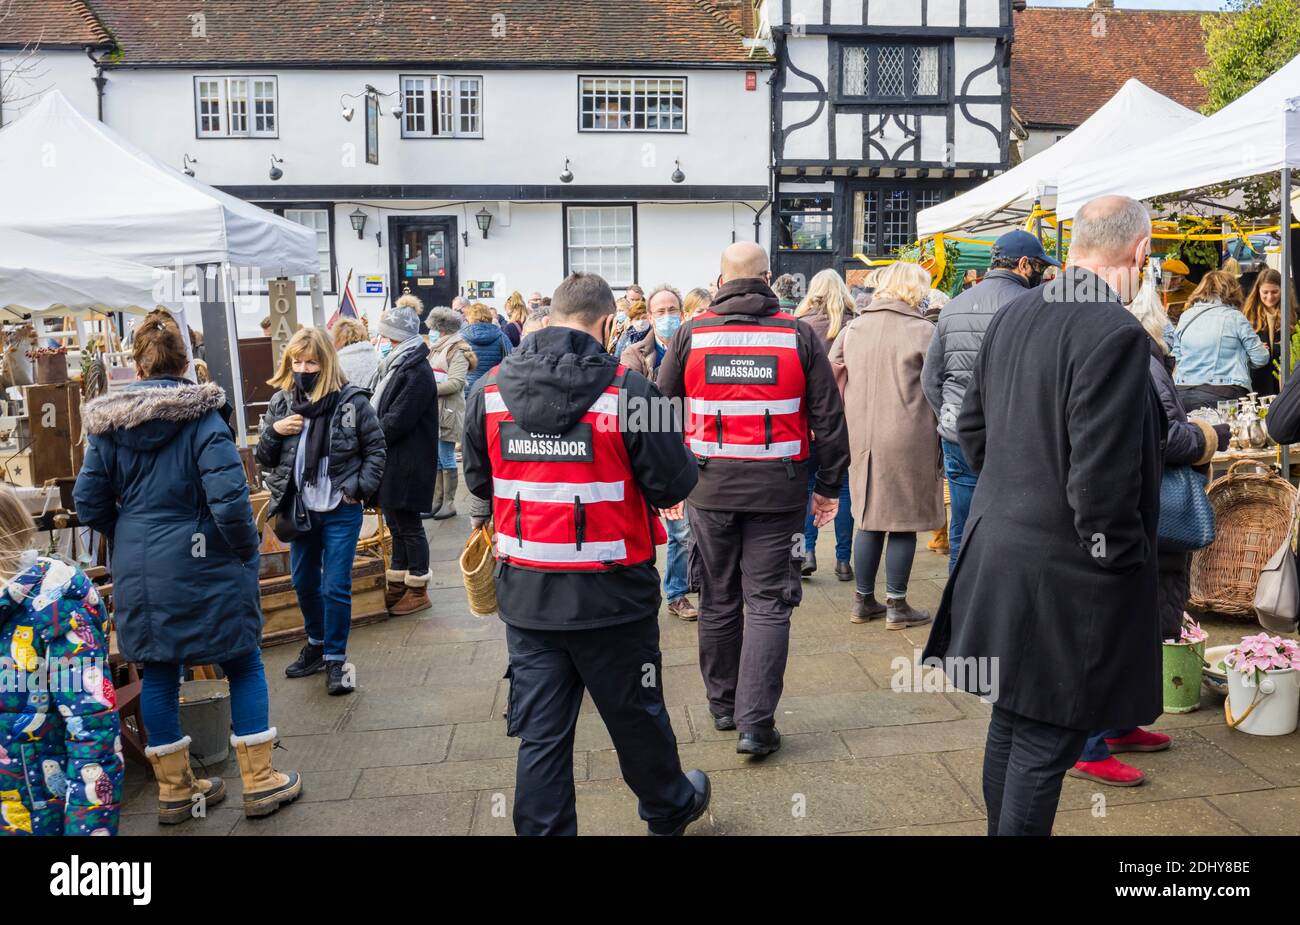 COVID ambassadors assist with social distancing and wearing face coverings at the Country Brocante Winter Fair, Market Square, Midhurst, West Sussex Stock Photo